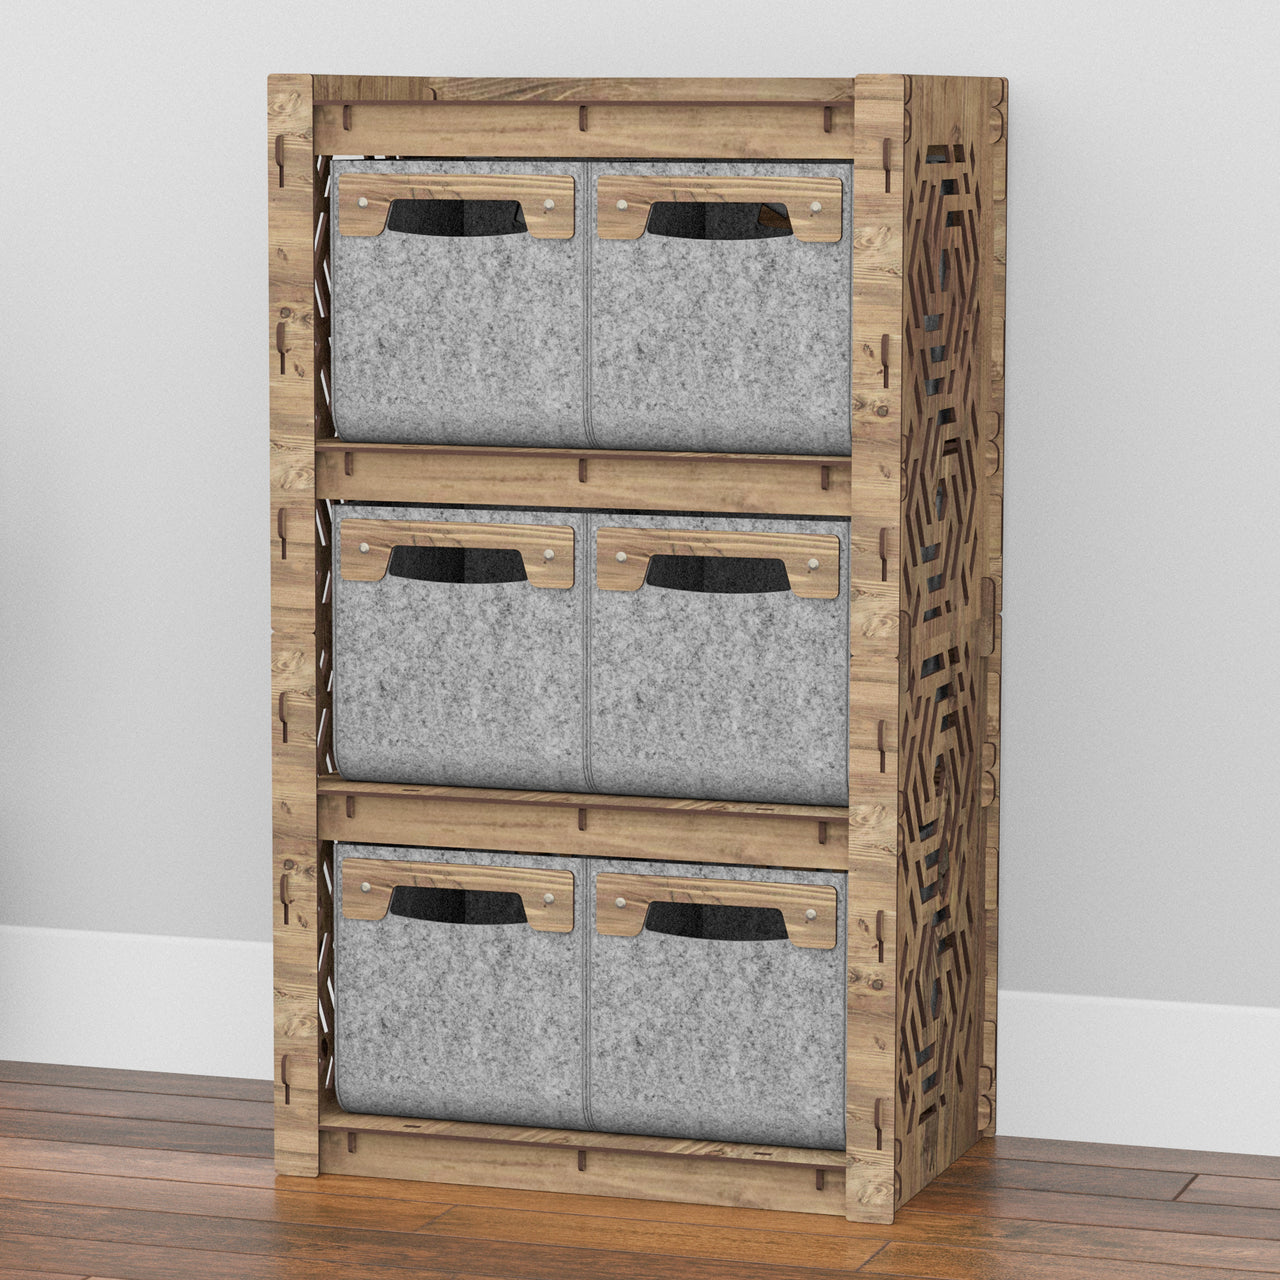 Solar Chest Of 6 Drawers Storage Cabinet [6 SMALL GRAY BINS]